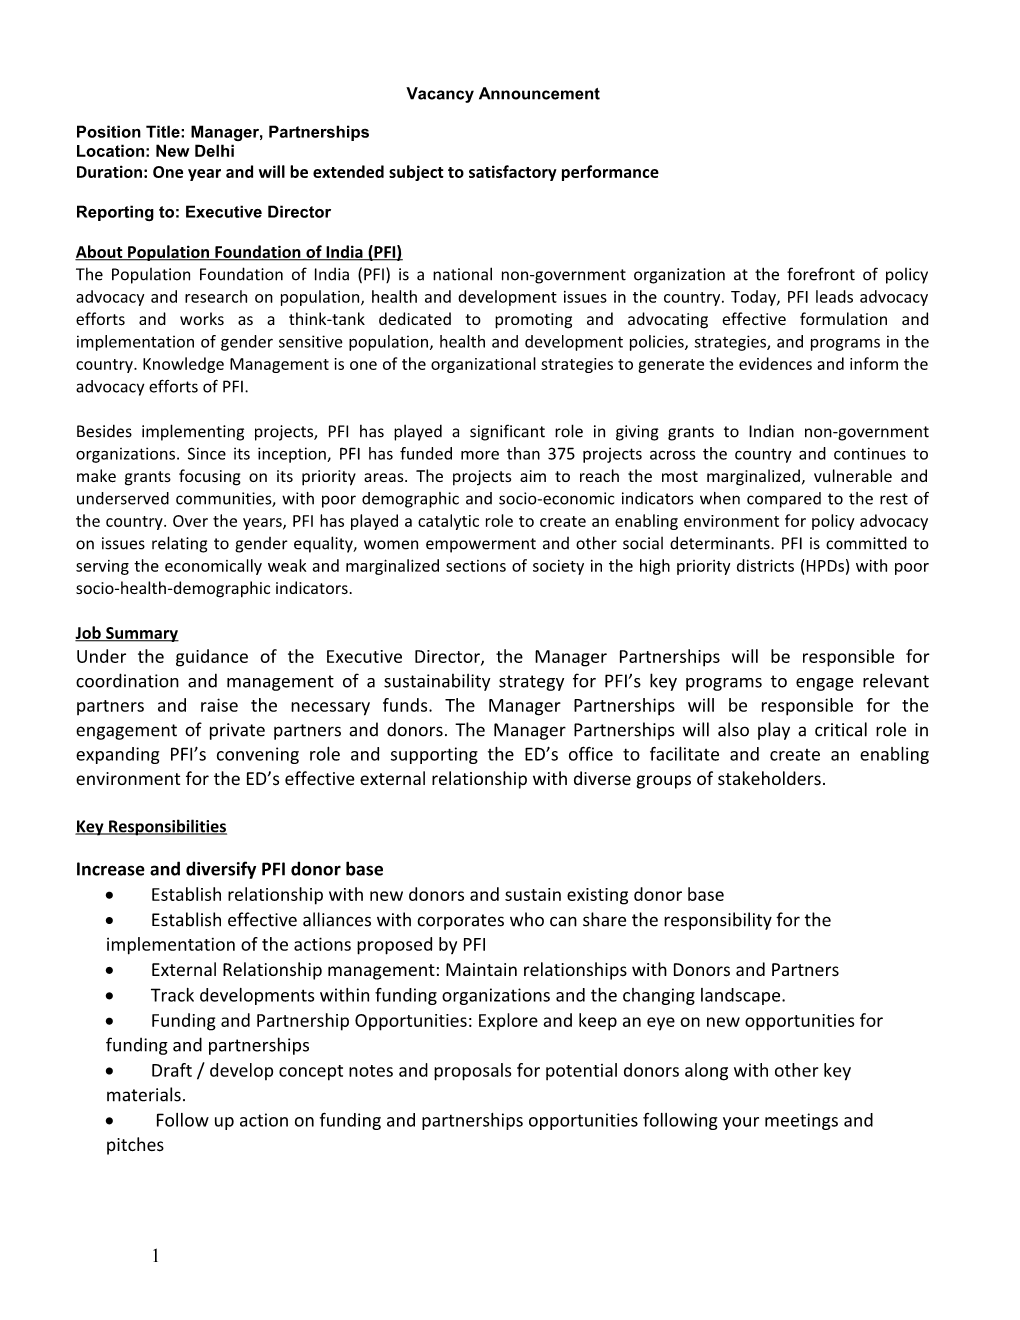 Position Title: Manager, Partnerships